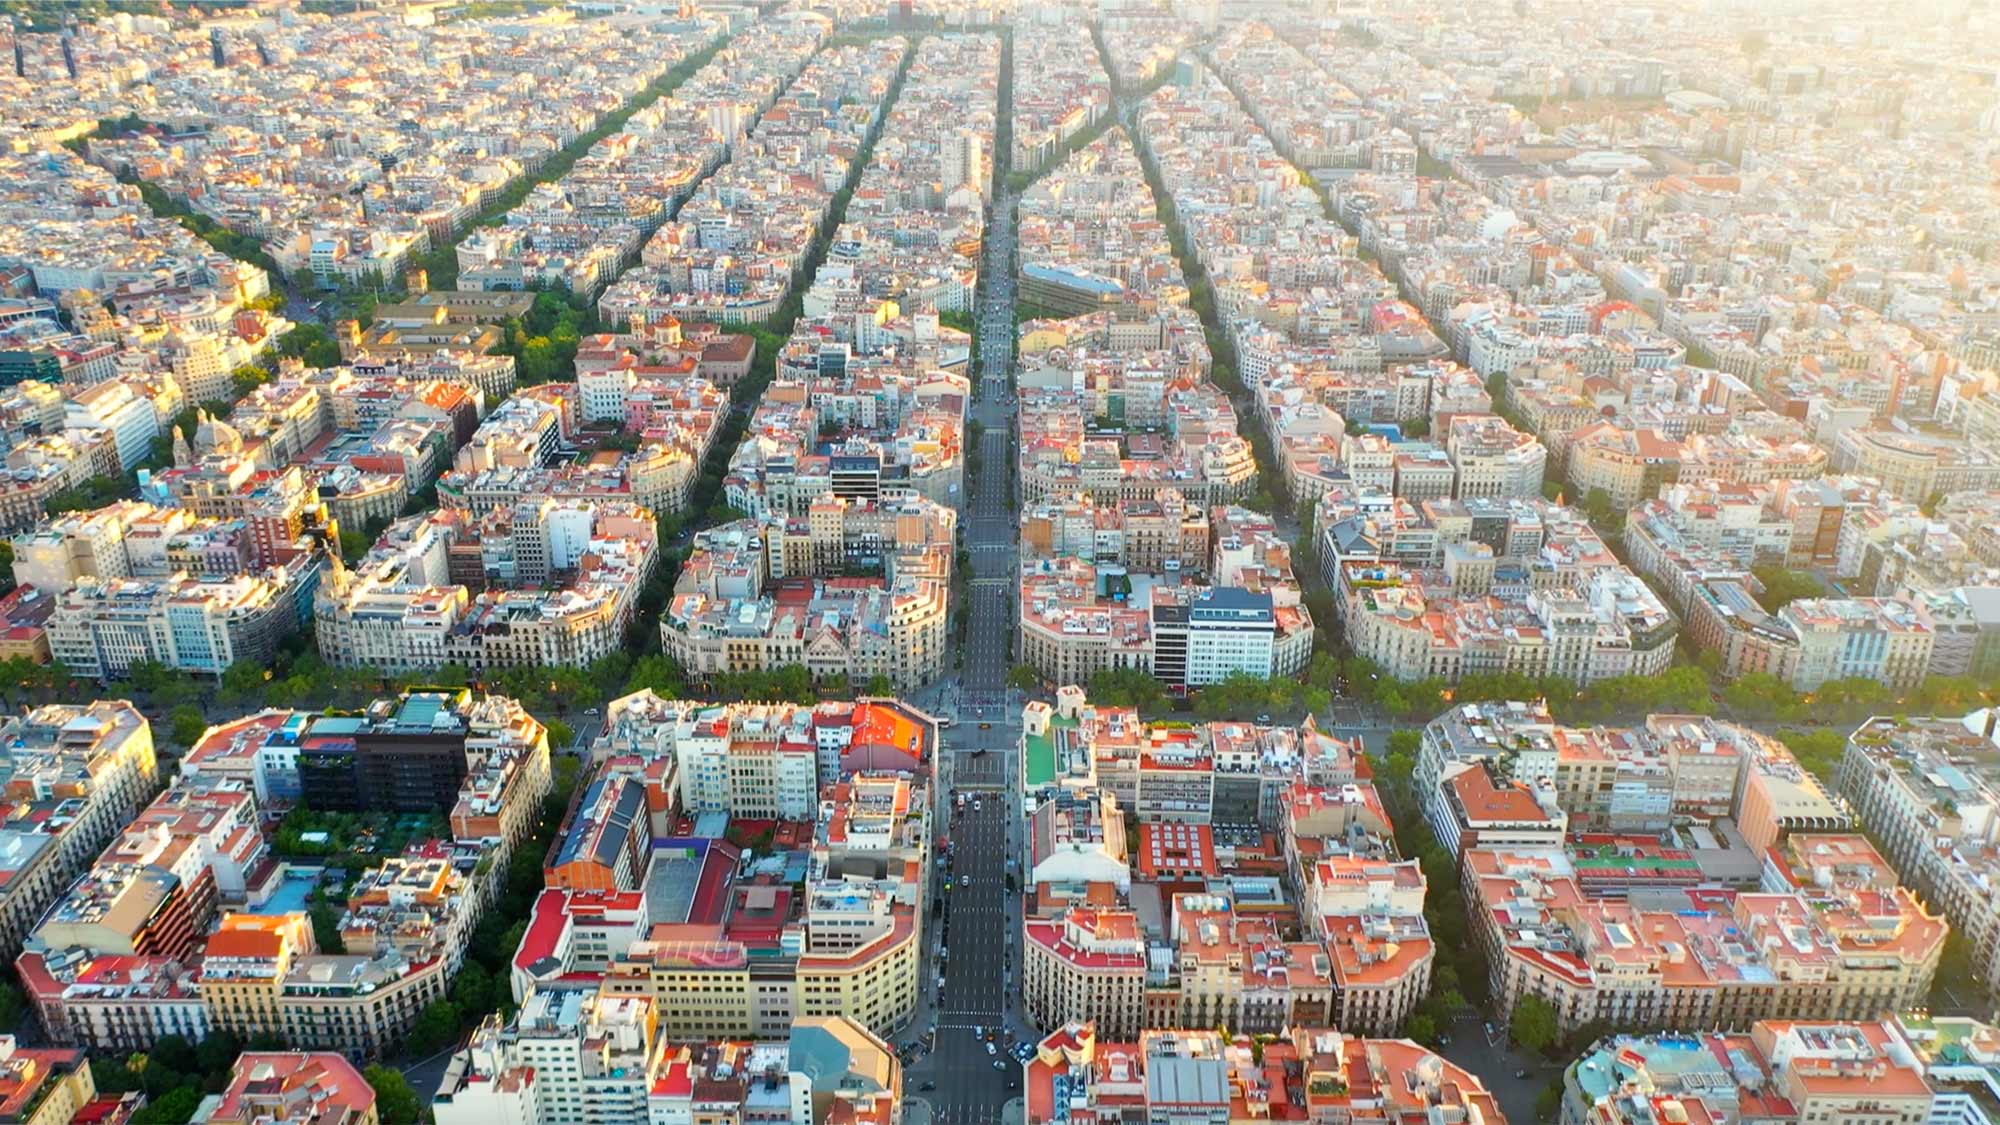 Aerial view of Barcelona - Arup can help with planning and funding across the city realm